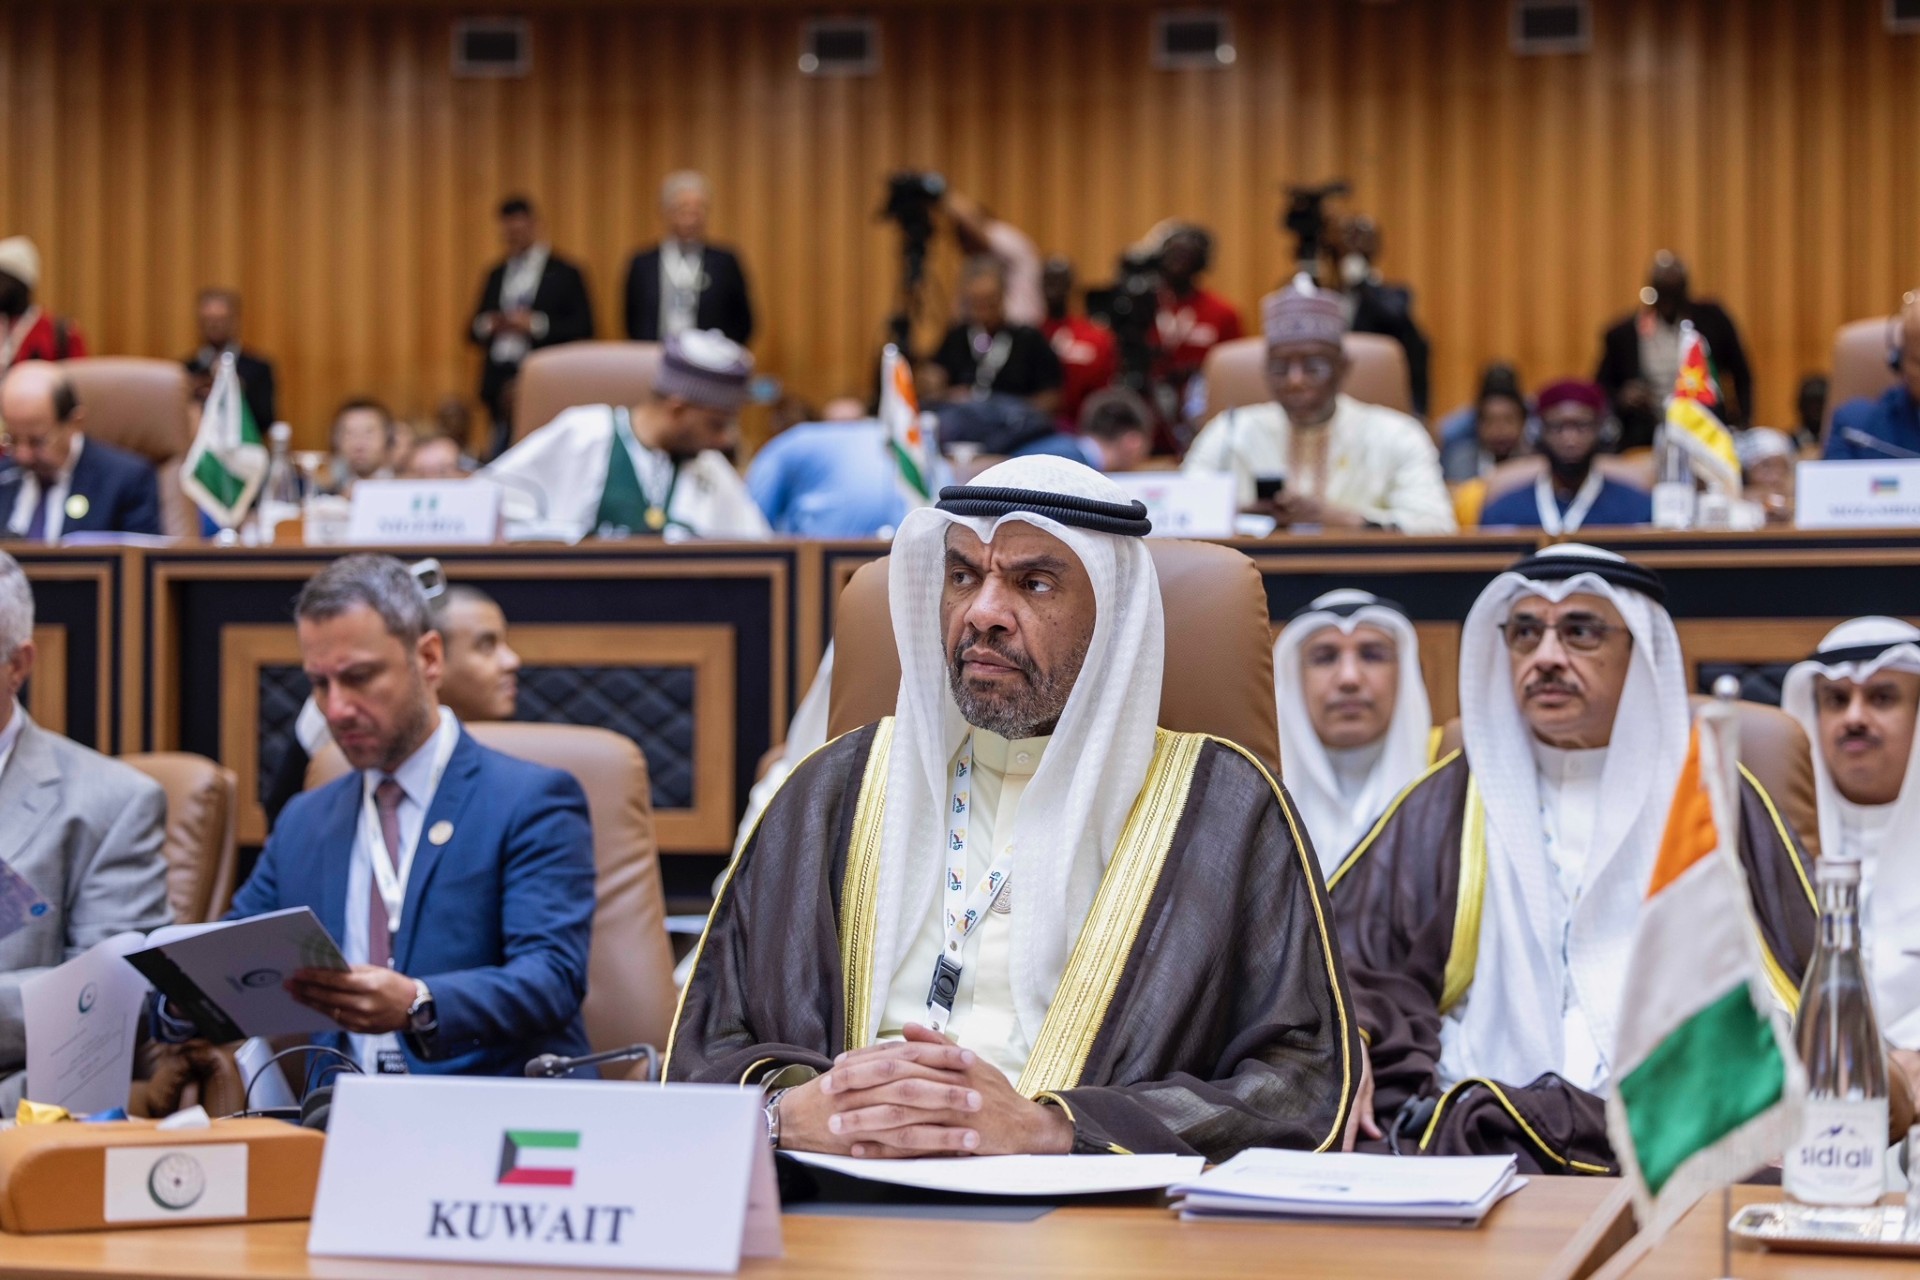 Representative of His Highness the Amir, the Foreign Minister Abdullah Al-Yahya leads Kuwait Delegation to the 15th Islamic Summit of the OIC.